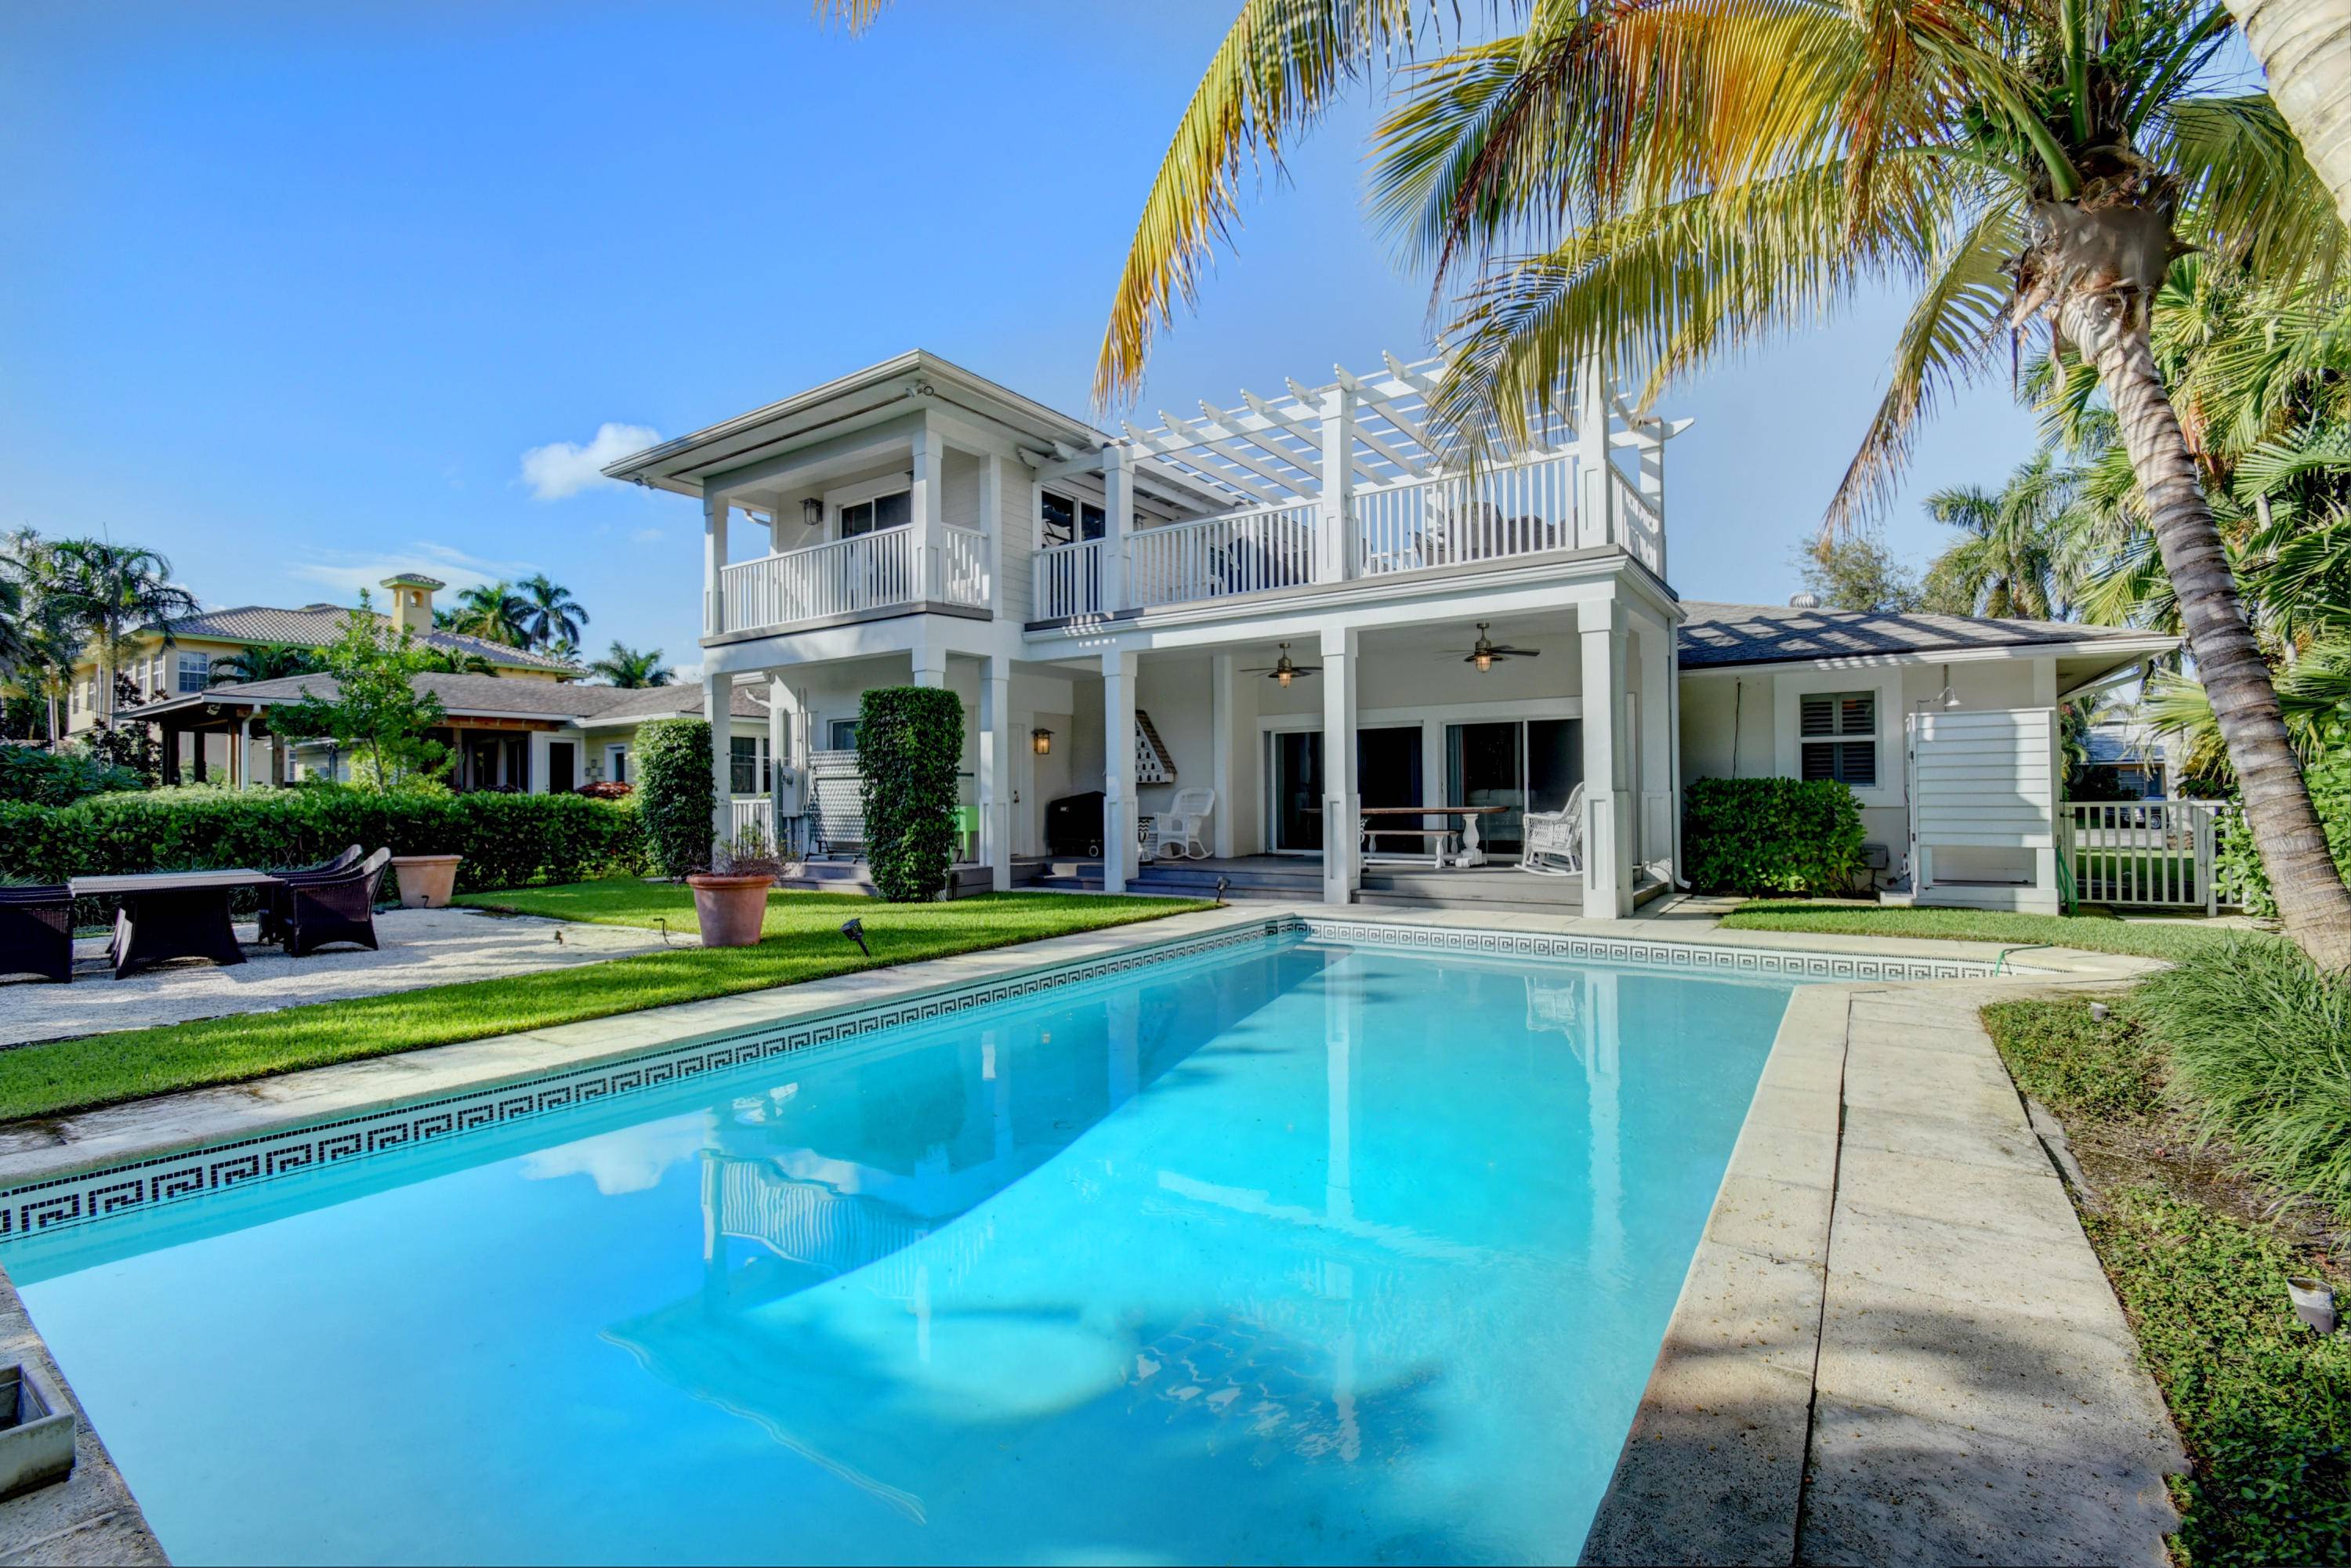 STUNNING 6 BEDROOM HOME JUST 2 BLOCKS FROM THE BEACH, 1 BLOCK FROM THE INTRACOASTAL, AND 5 BLOCKS NORTH OF EXCITING ATLANTIC AVENUE !